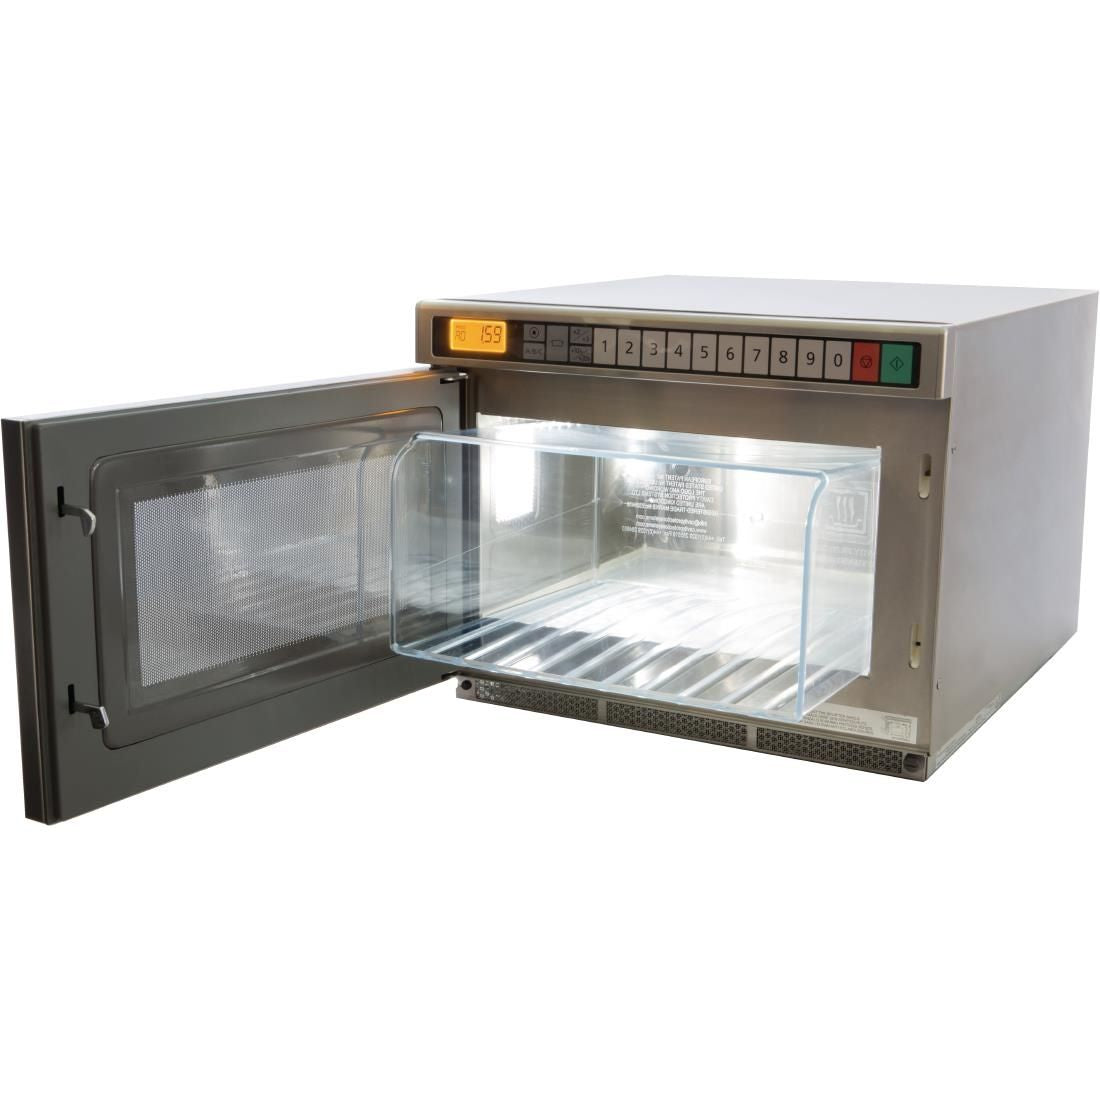 HC171 Panasonic Commercial Microwave 17ltr 1800W NE1853 with Liner JD Catering Equipment Solutions Ltd